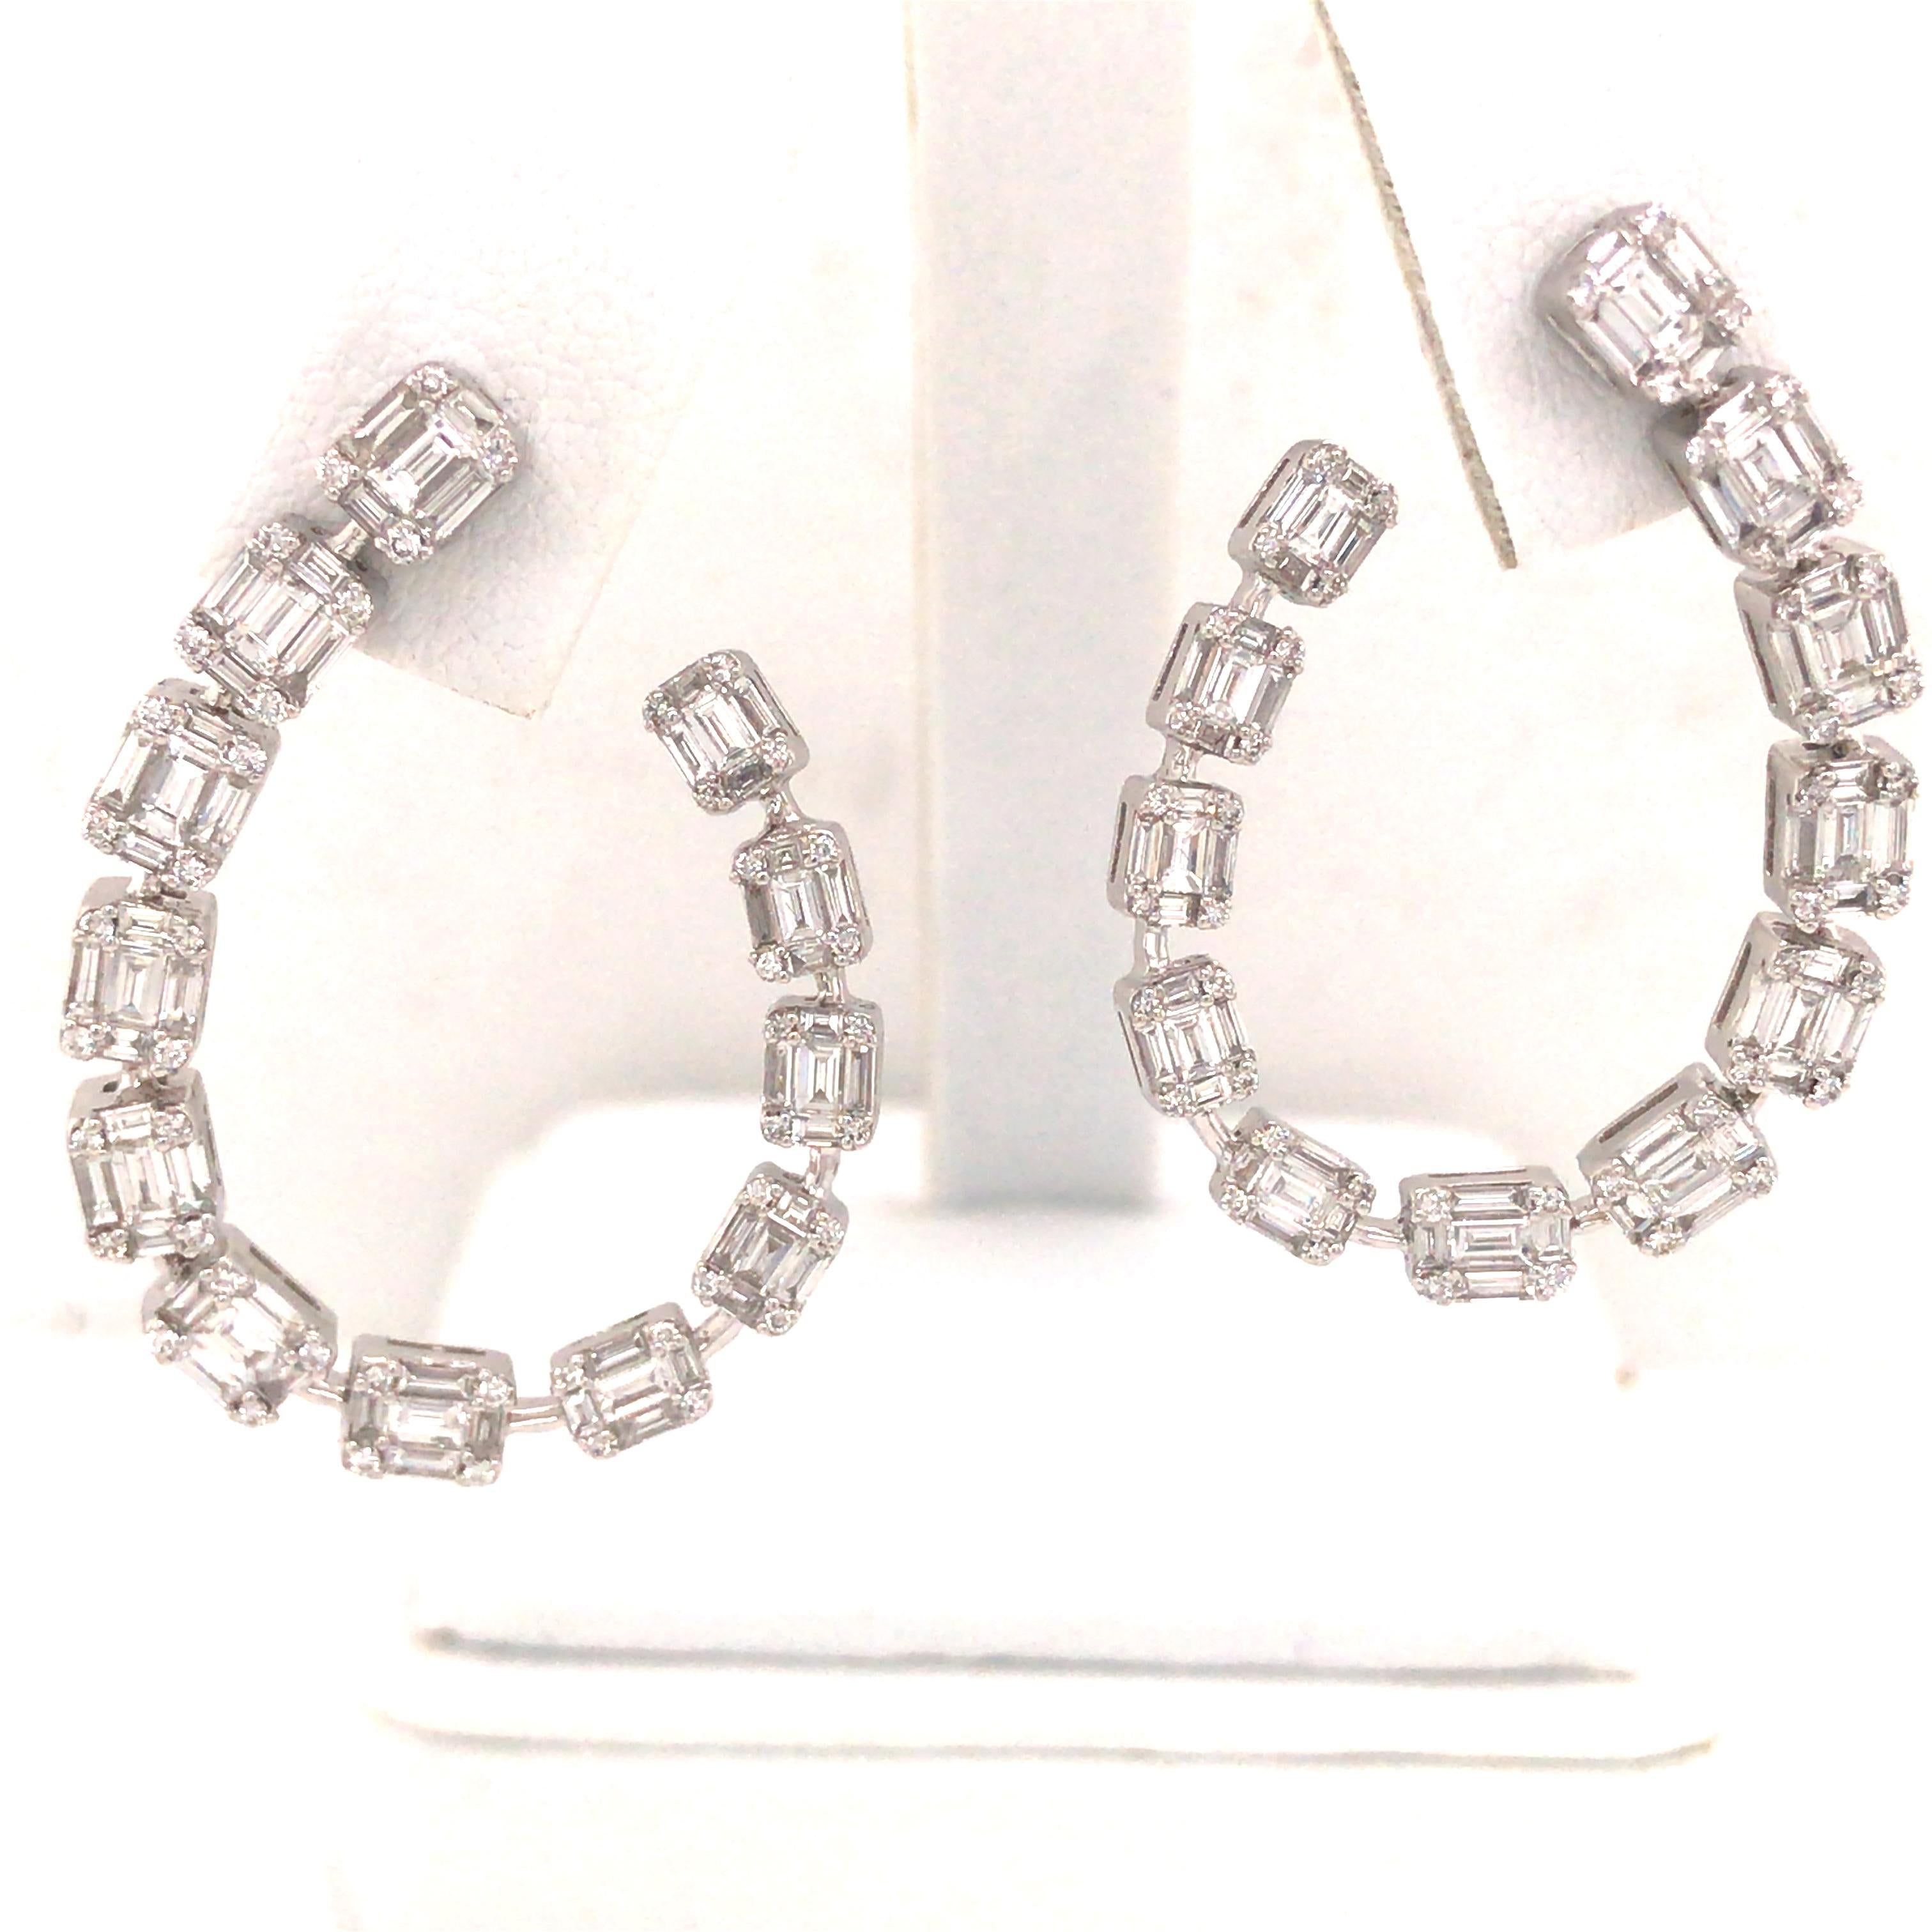 Round and Baguette Diamond Open Hoop Earring in 18K White Gold.  Round Brilliant Cut and Baguette Diamonds weighing 2.73 carat total weight, G-H in color and VS-SI in clarity are expertly set.  The Earrings measure 1 3/8 inch in length and 1 inch in